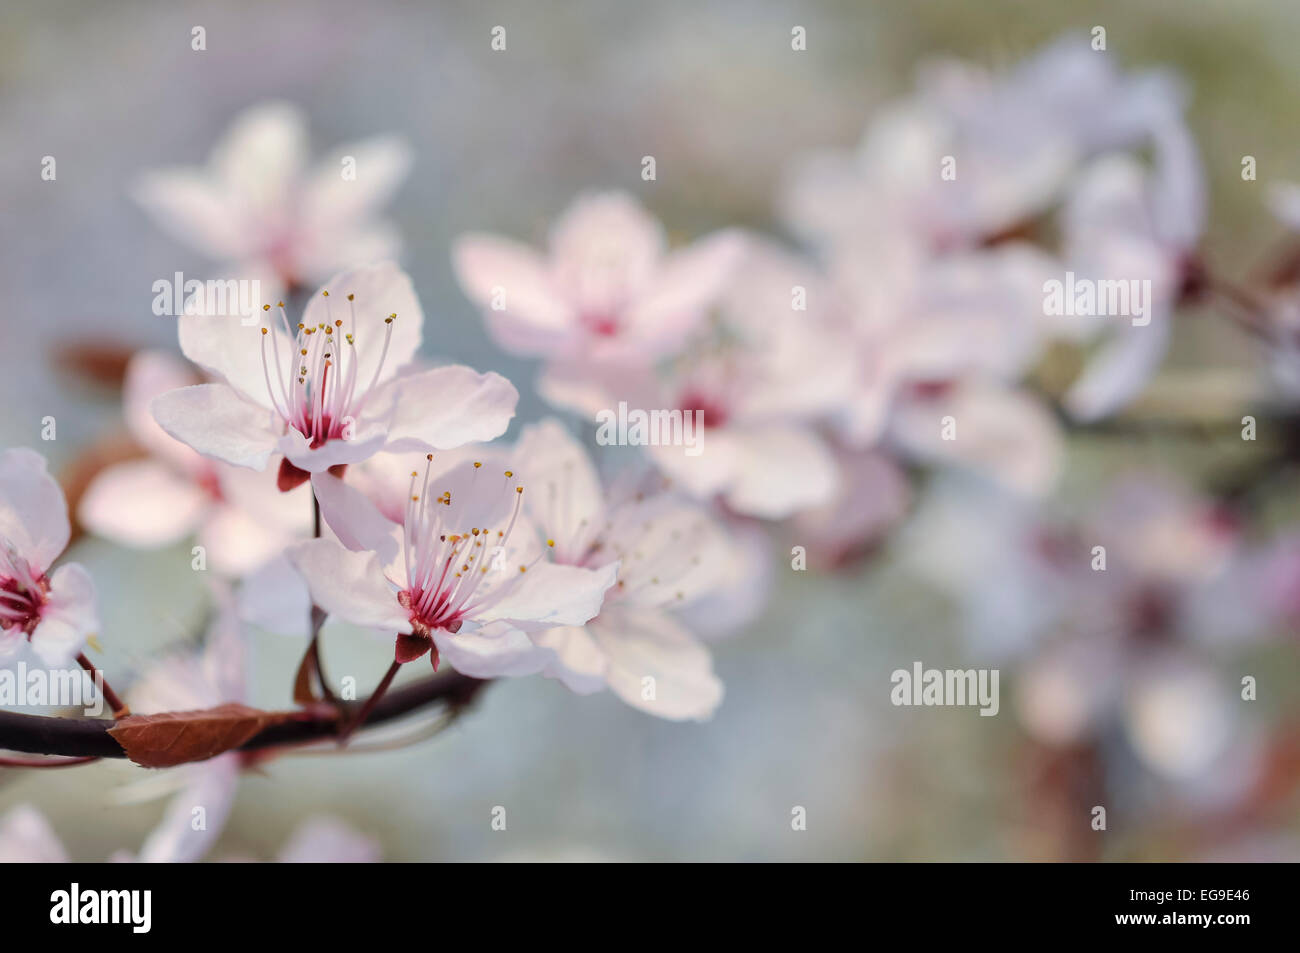 Pale pink single Cherry Blossom. Delicate spring blossom in close up. Stock Photo